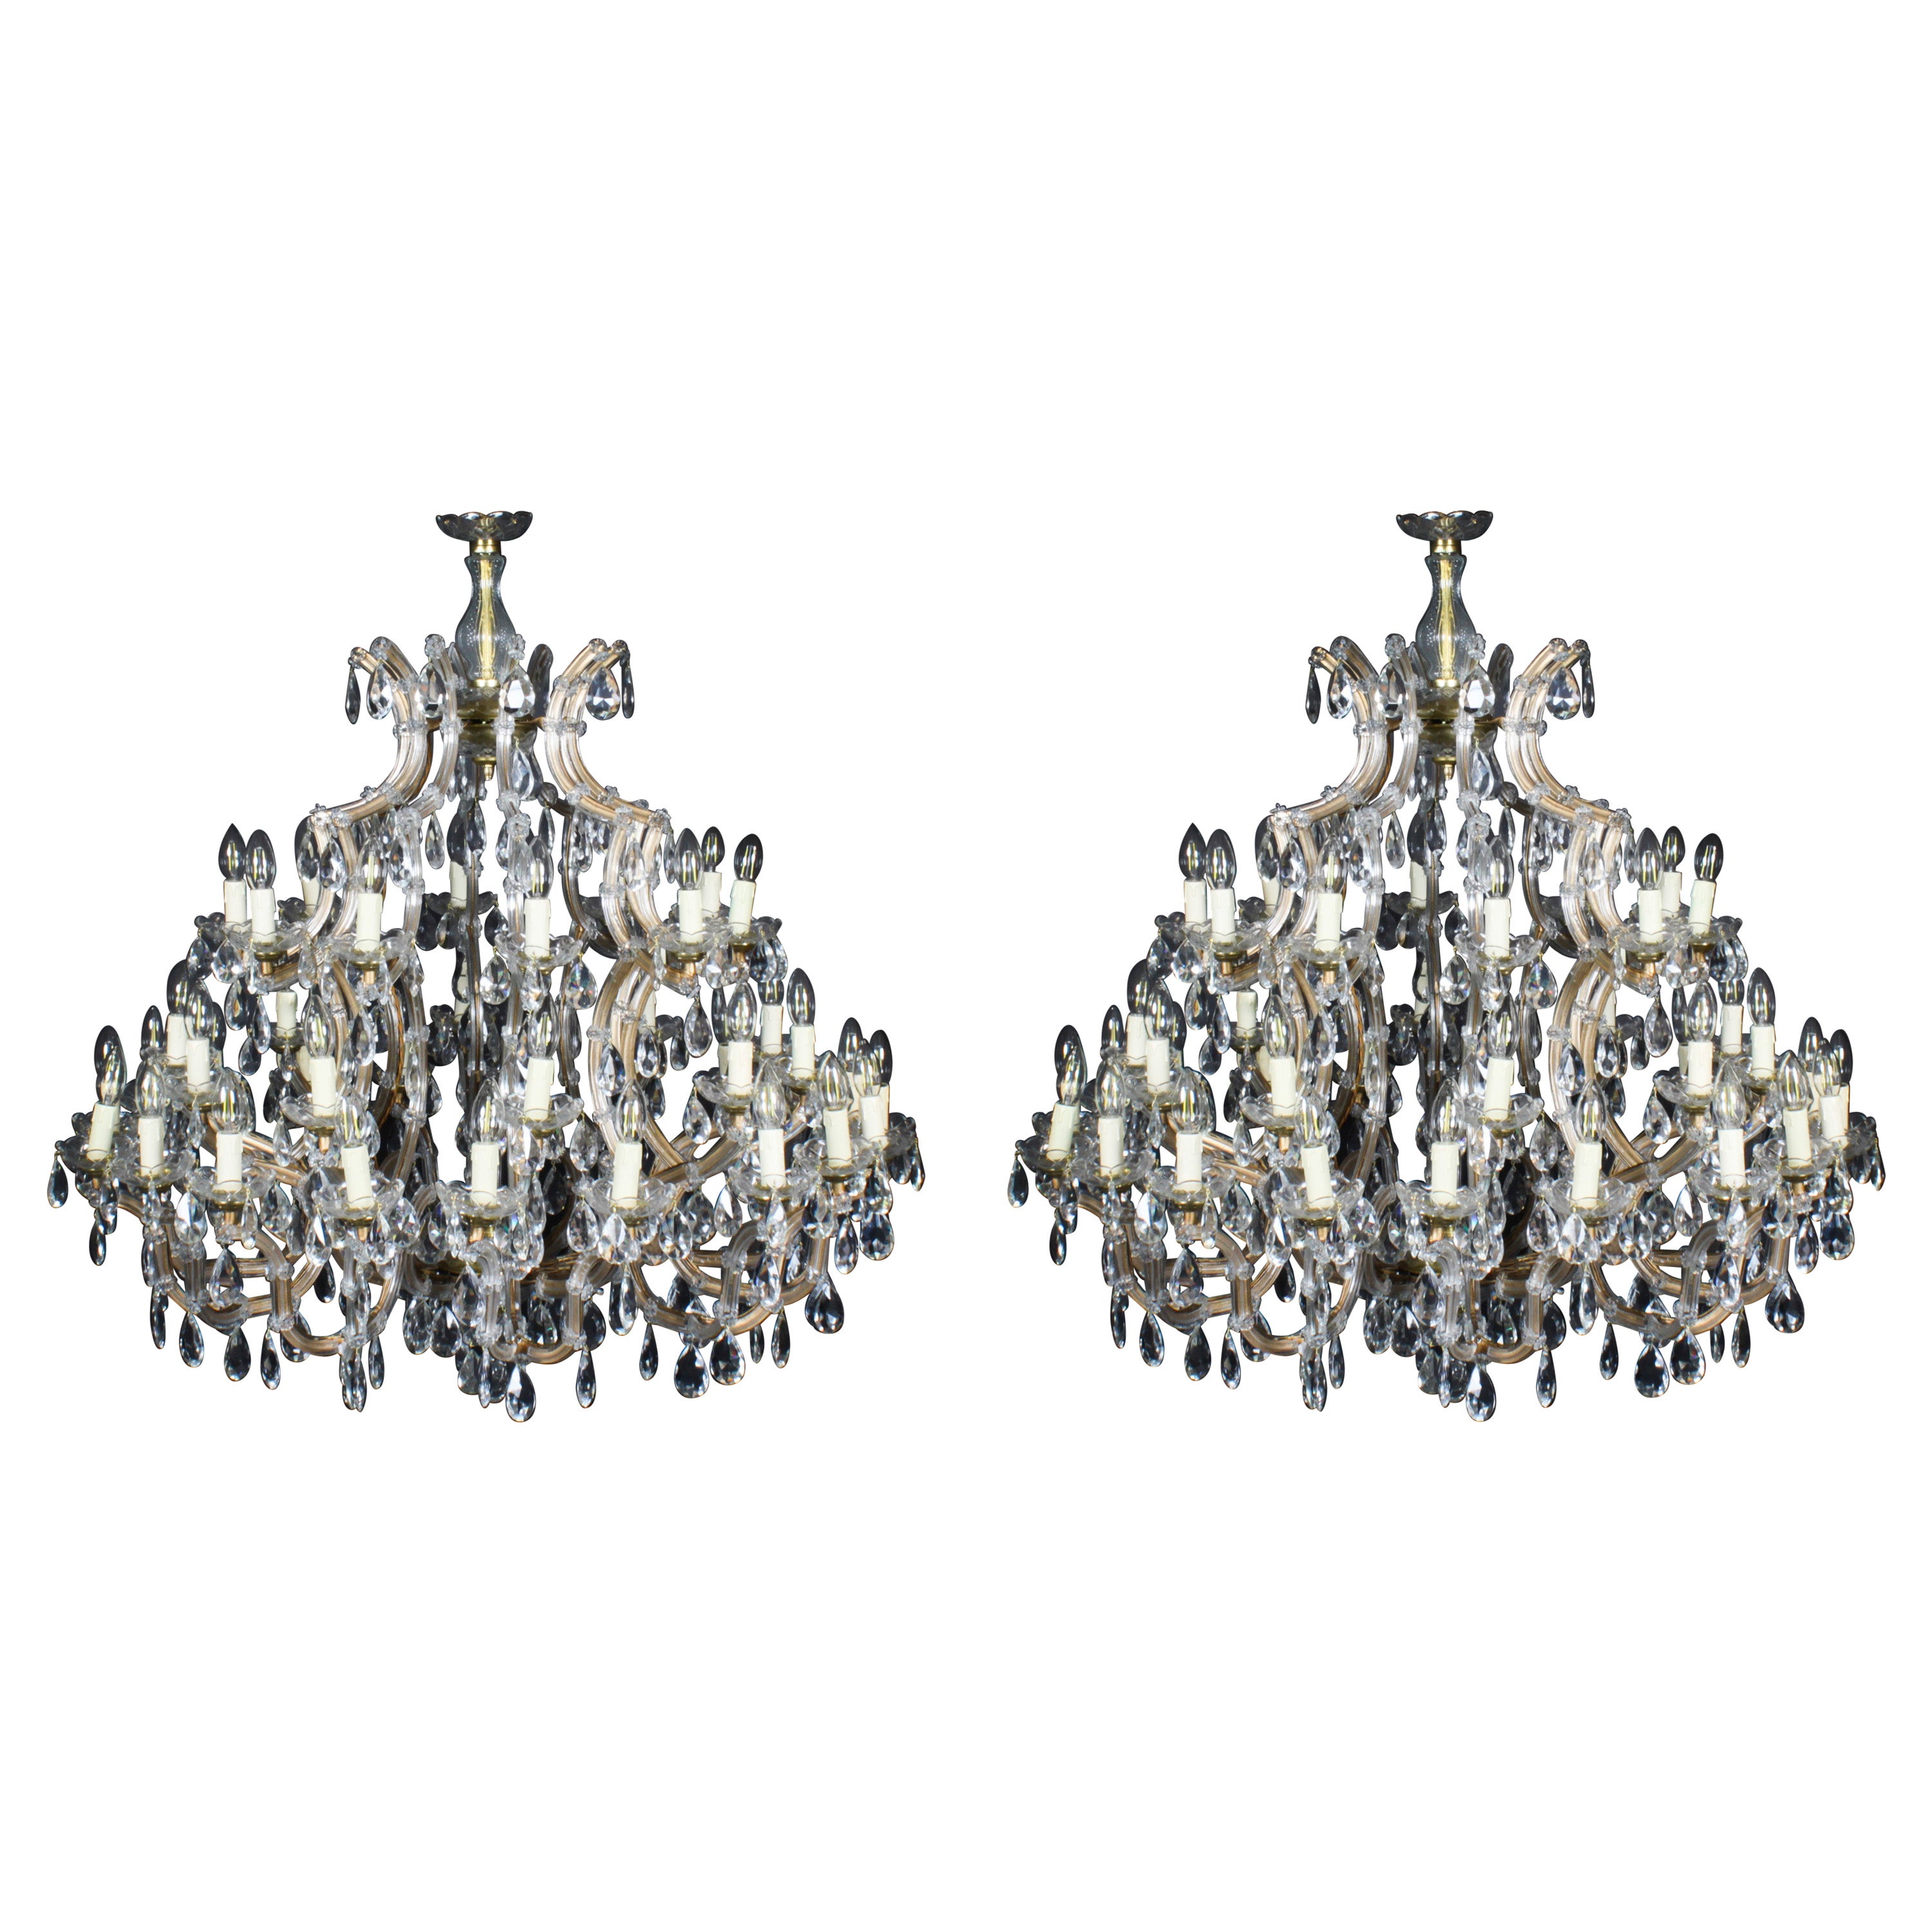 Antique Pair English 41 light Ballroom Crystal Chandeliers 1920s For Sale